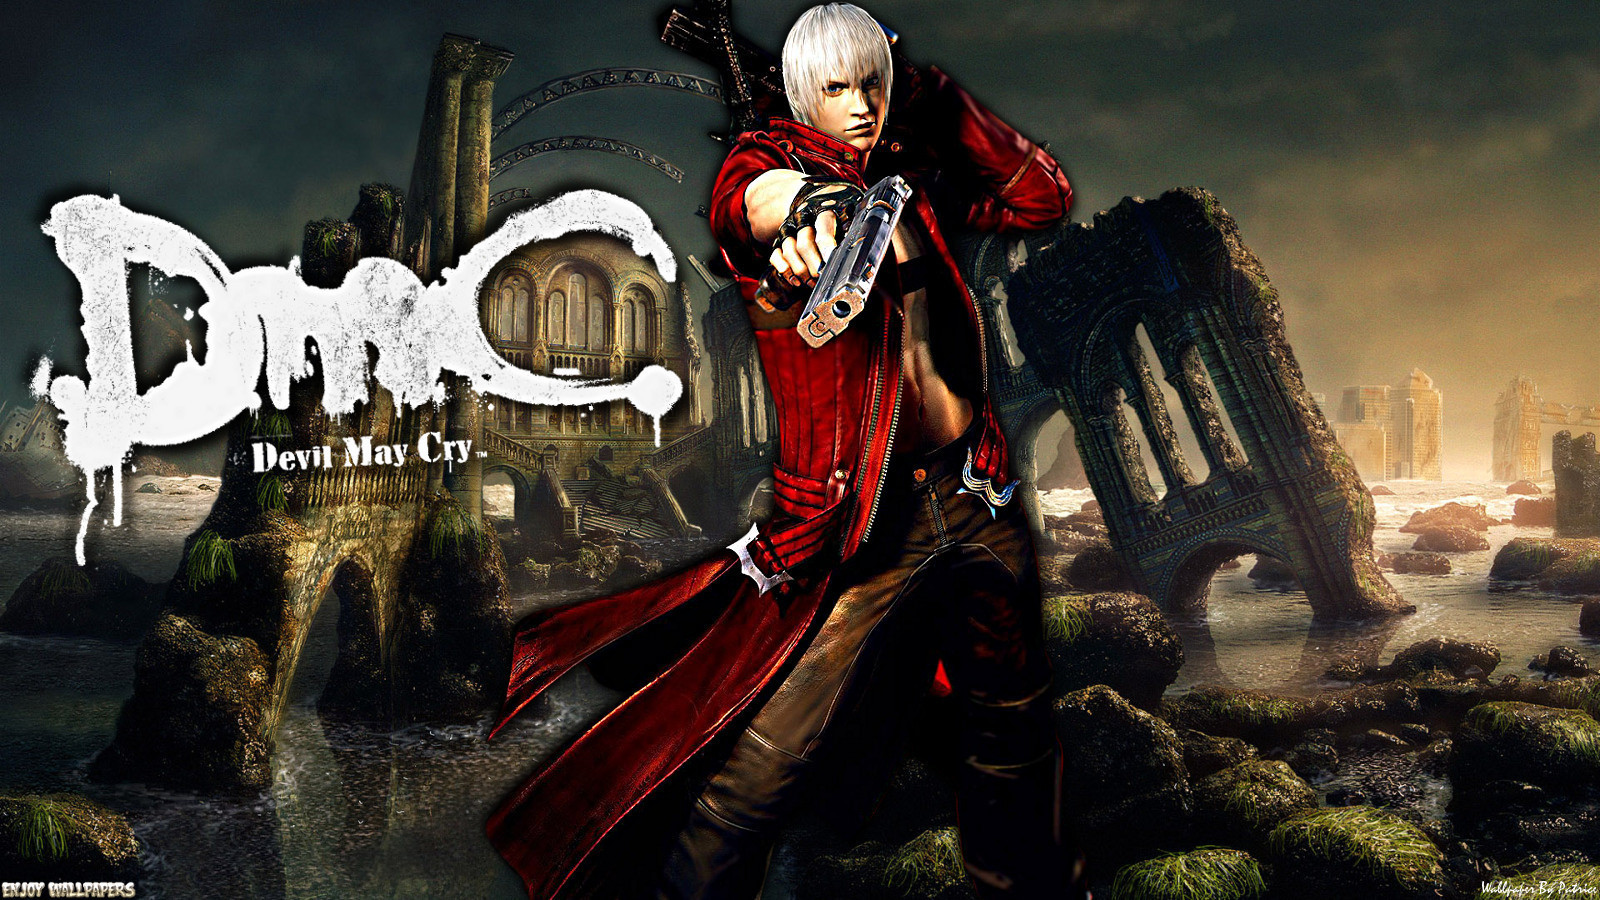 Devil May Cry Wallpaper Dante For Desktop Pictures In High